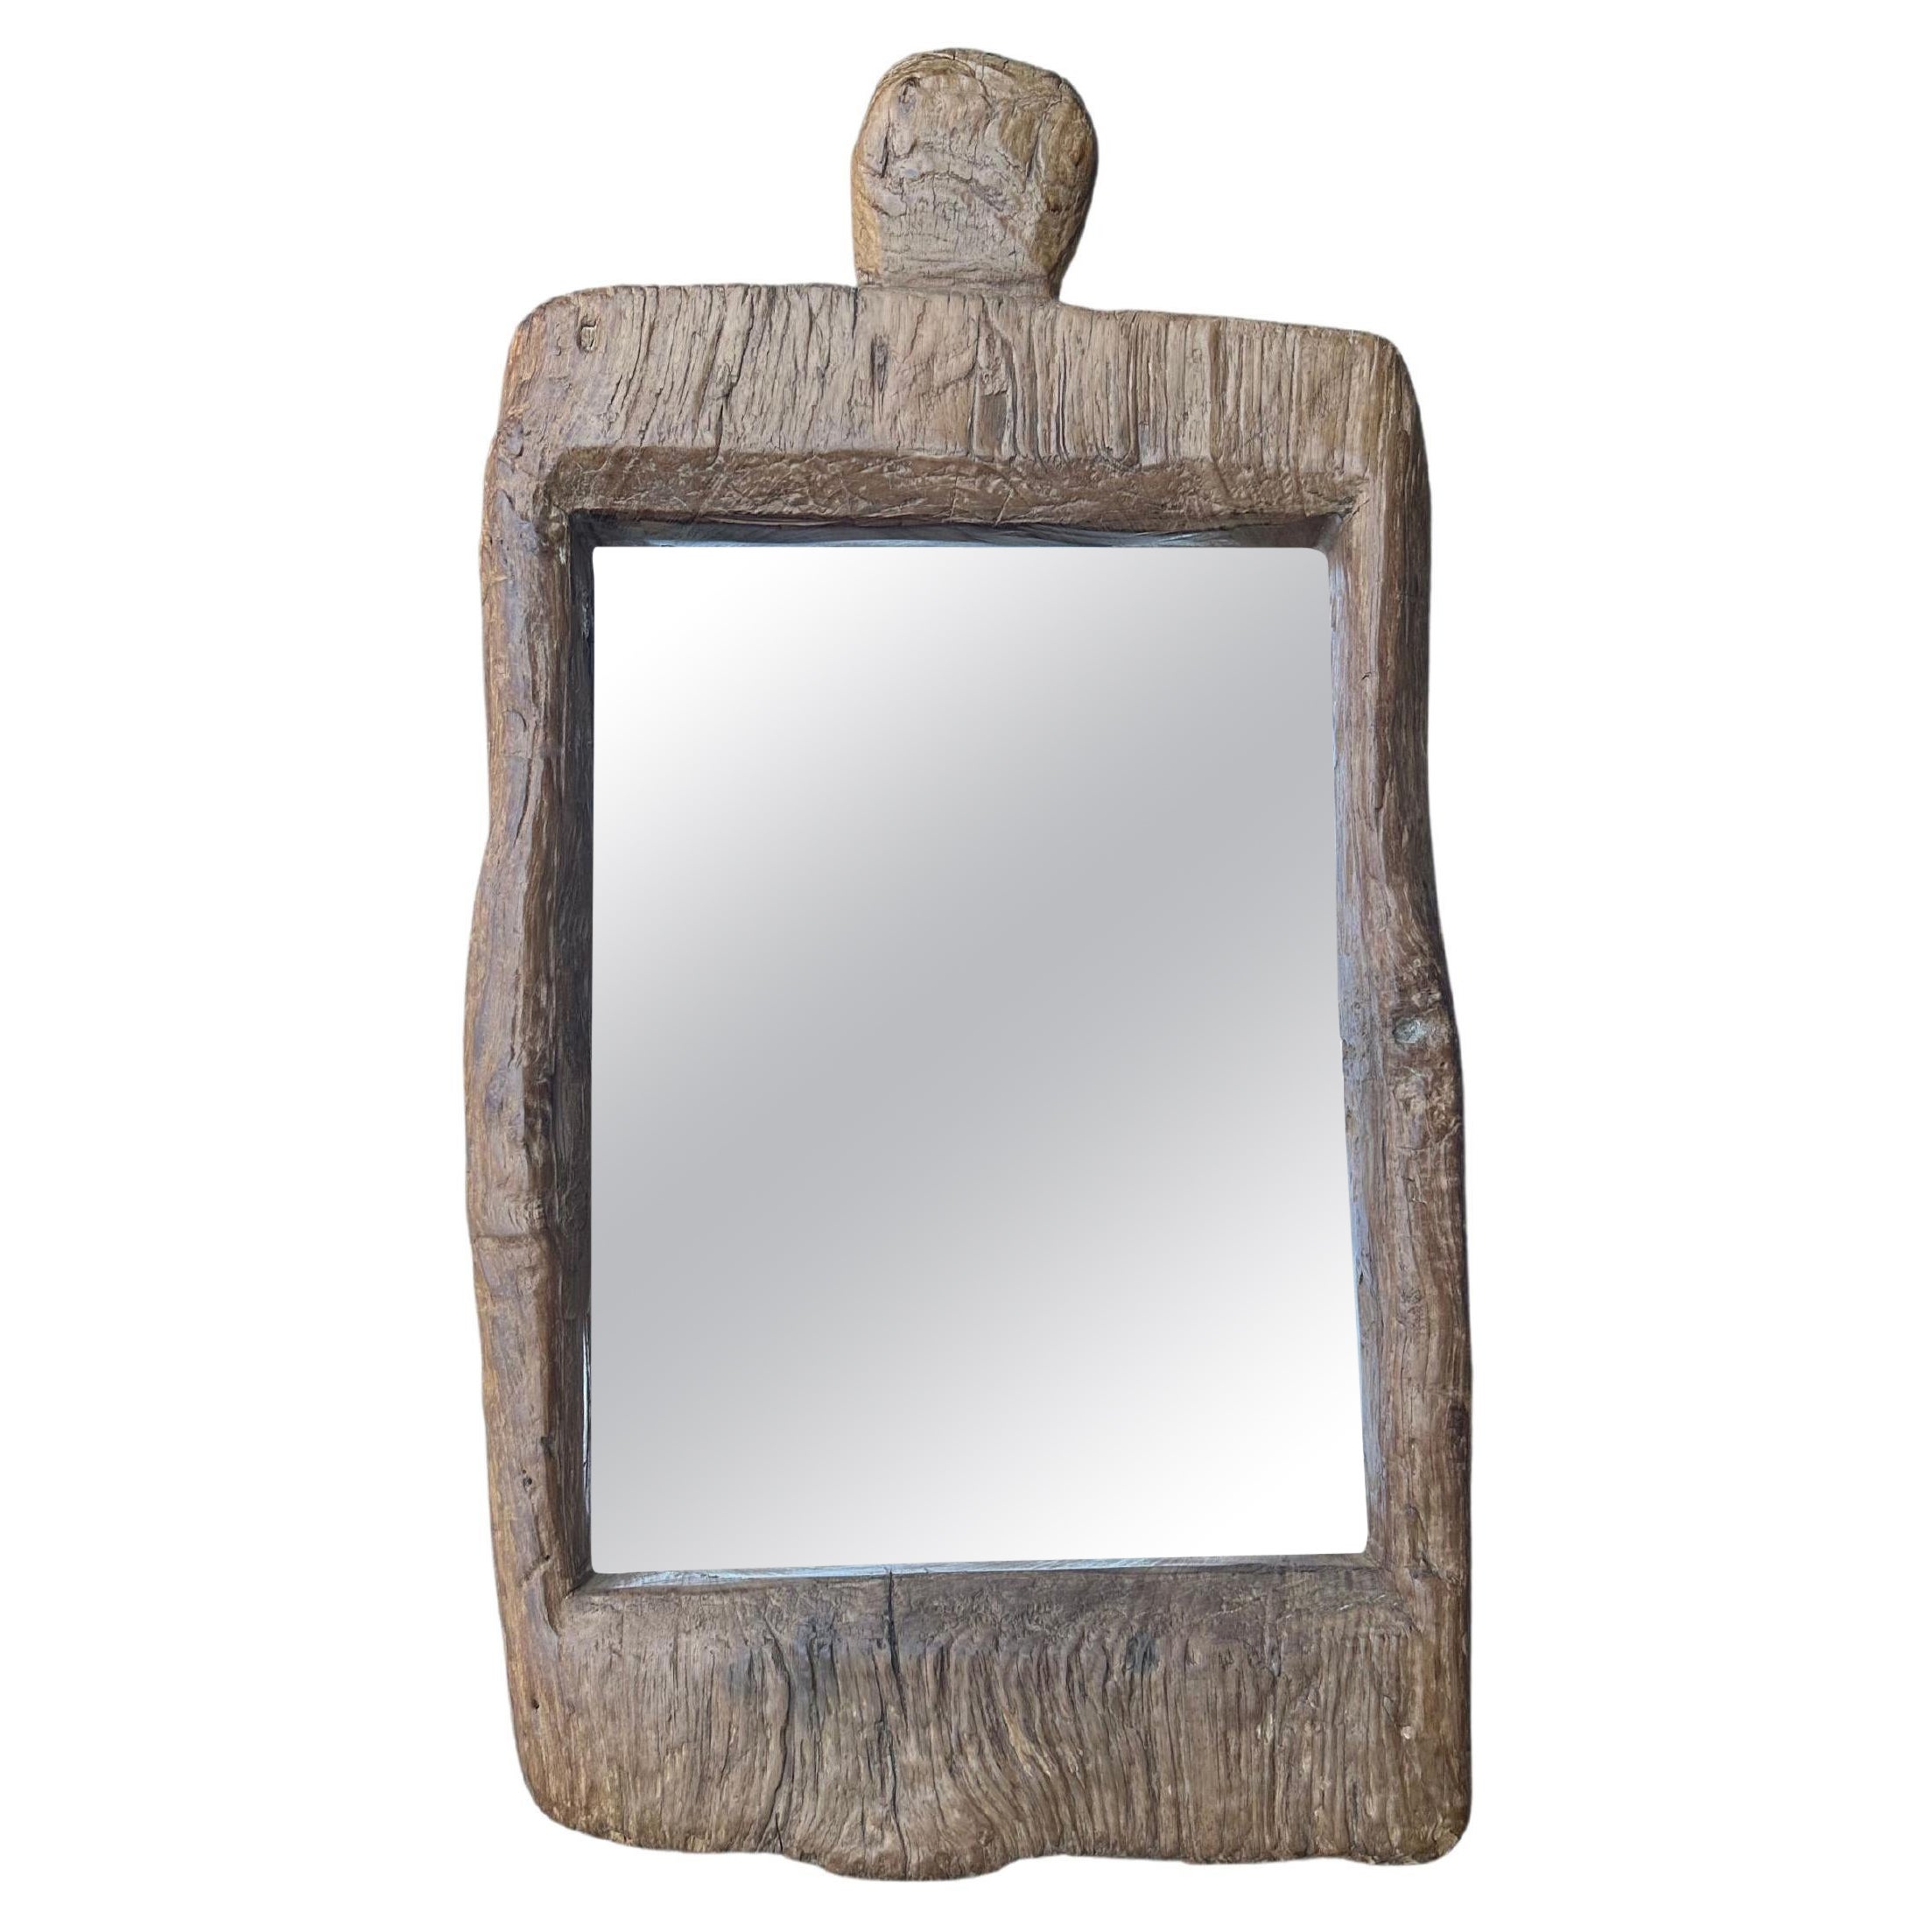 Rustic Teak Wood Mirror With Wonderful Age Related Patina & Markings For Sale